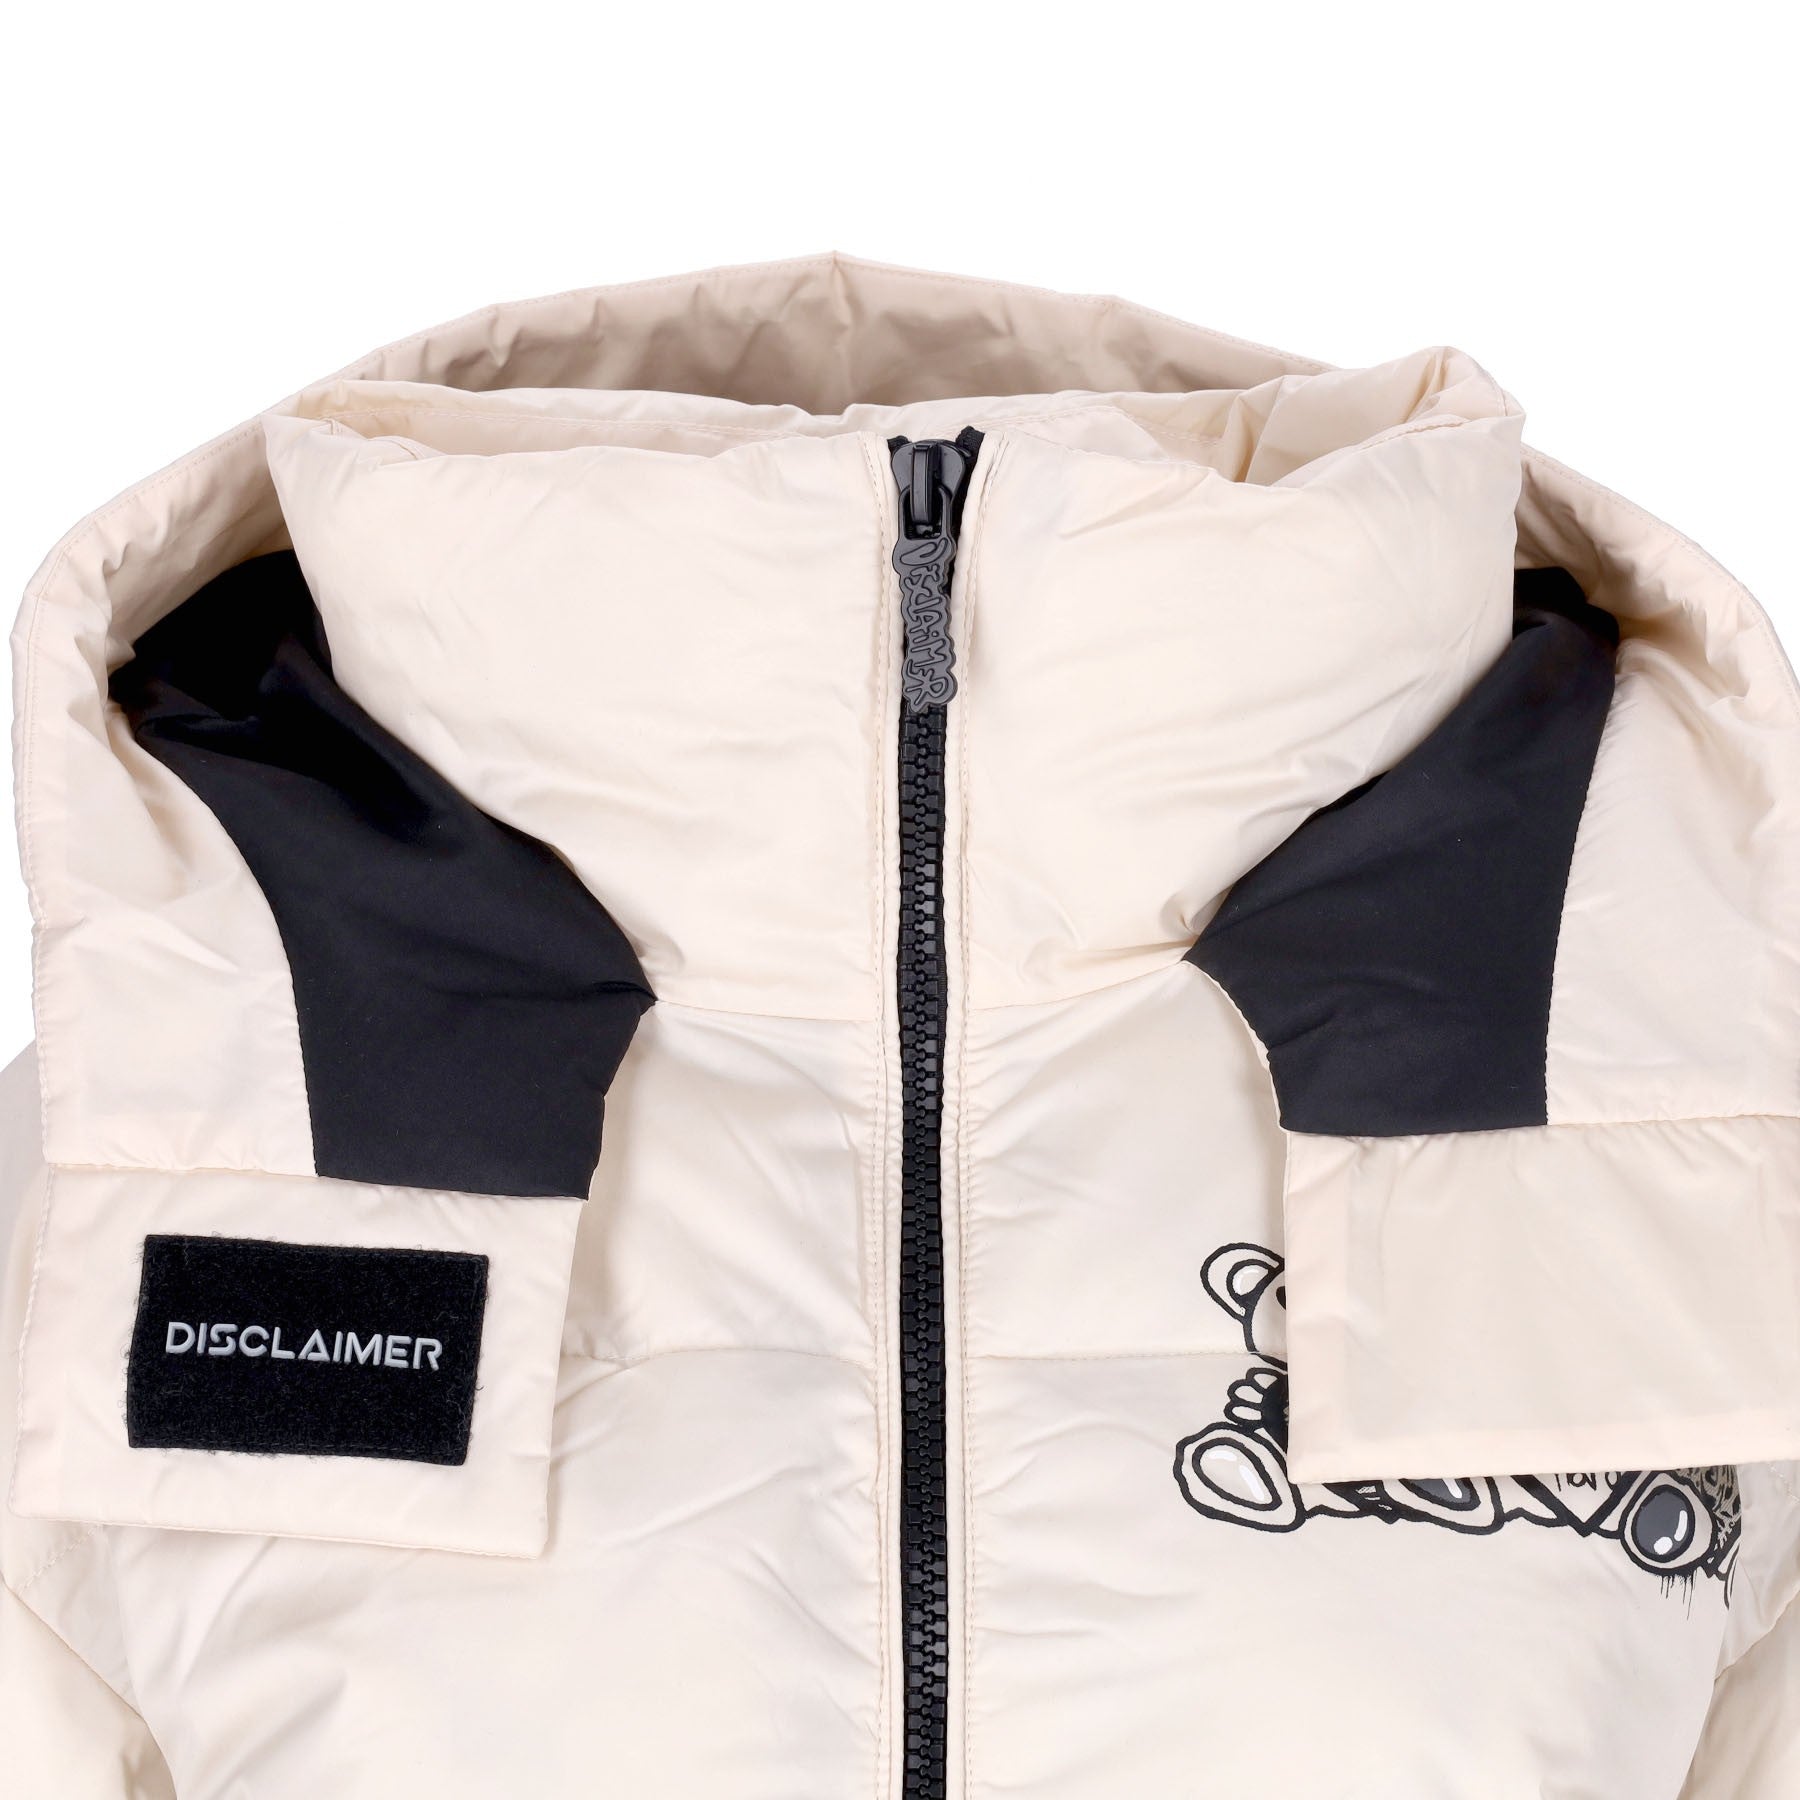 All Right Reserved Padded Jacket Women's Down Jacket